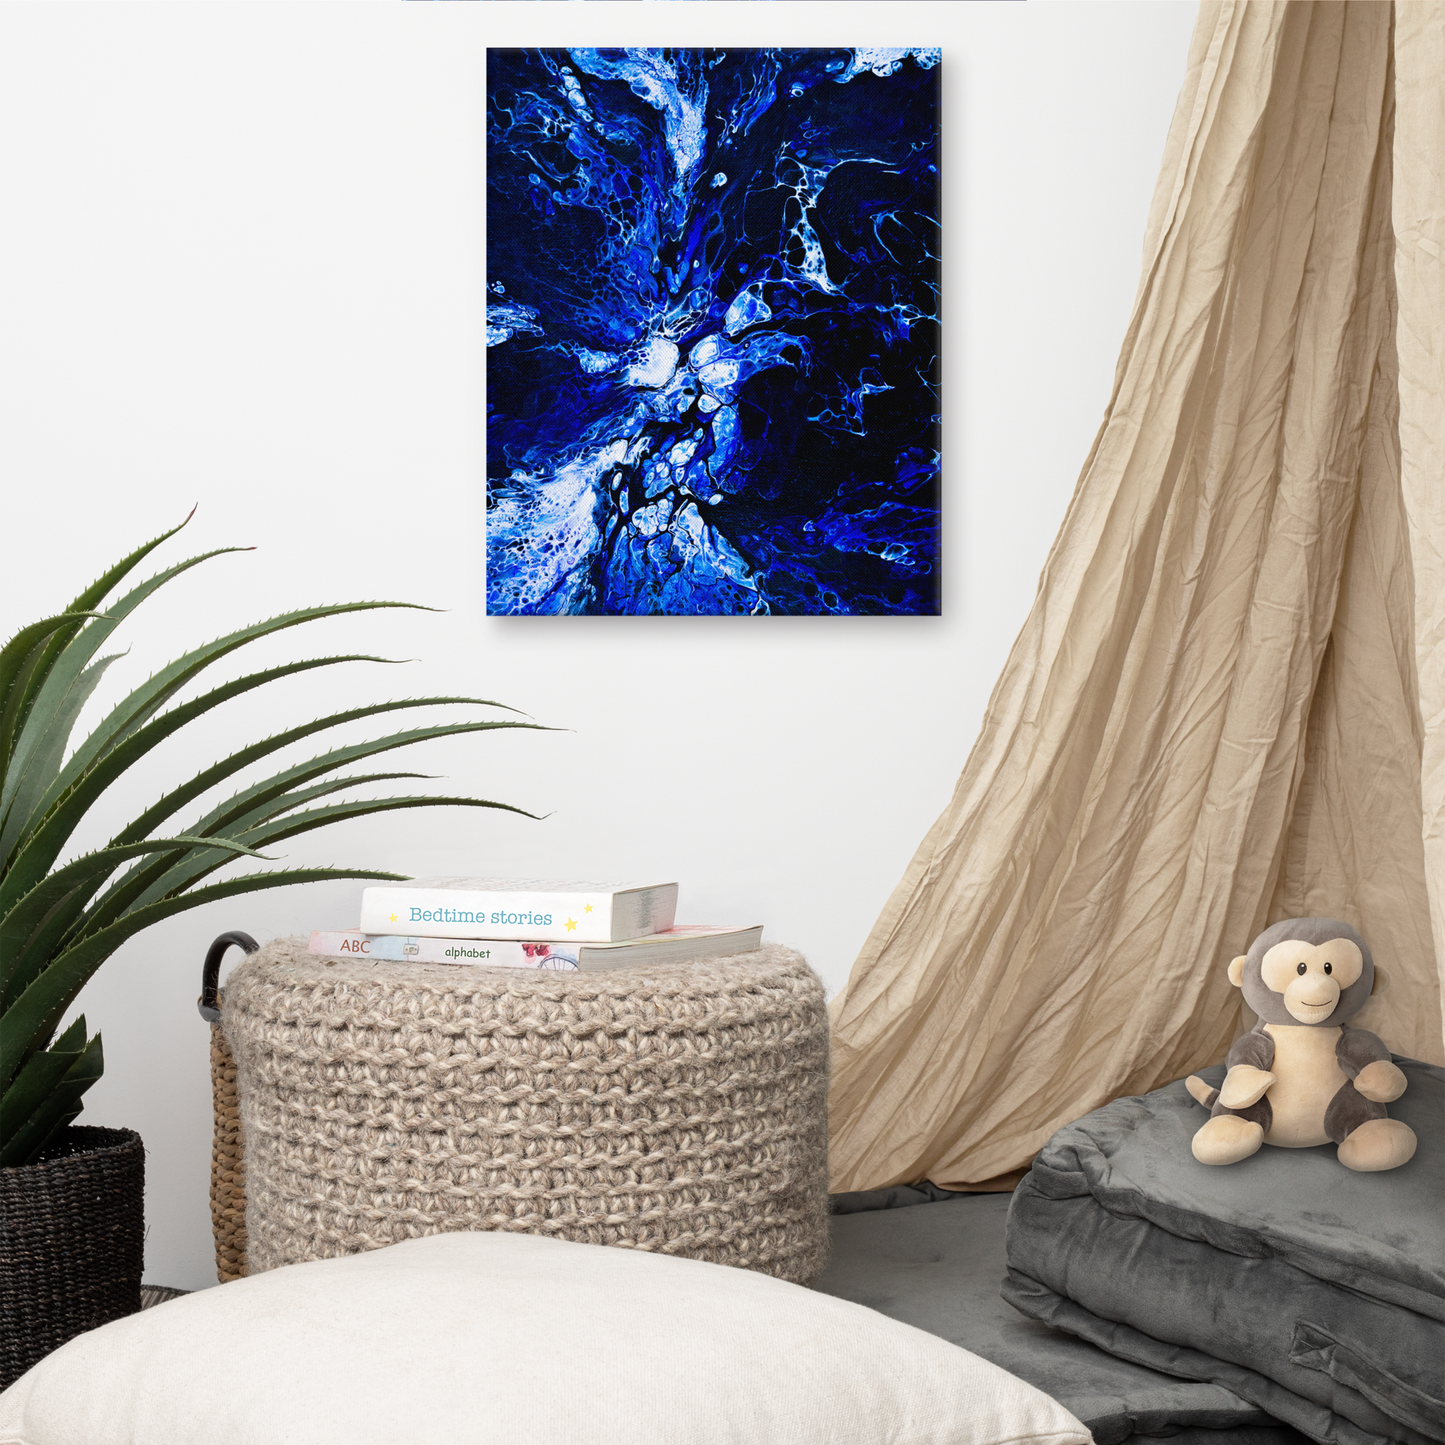 NightOwl Studio Abstract Wall Art, Blue Burst, Boho Living Room, Bedroom, Office, and Home Decor, Premium Canvas with Wooden Frame, Acrylic Painting Reproduction, 16” x 20”